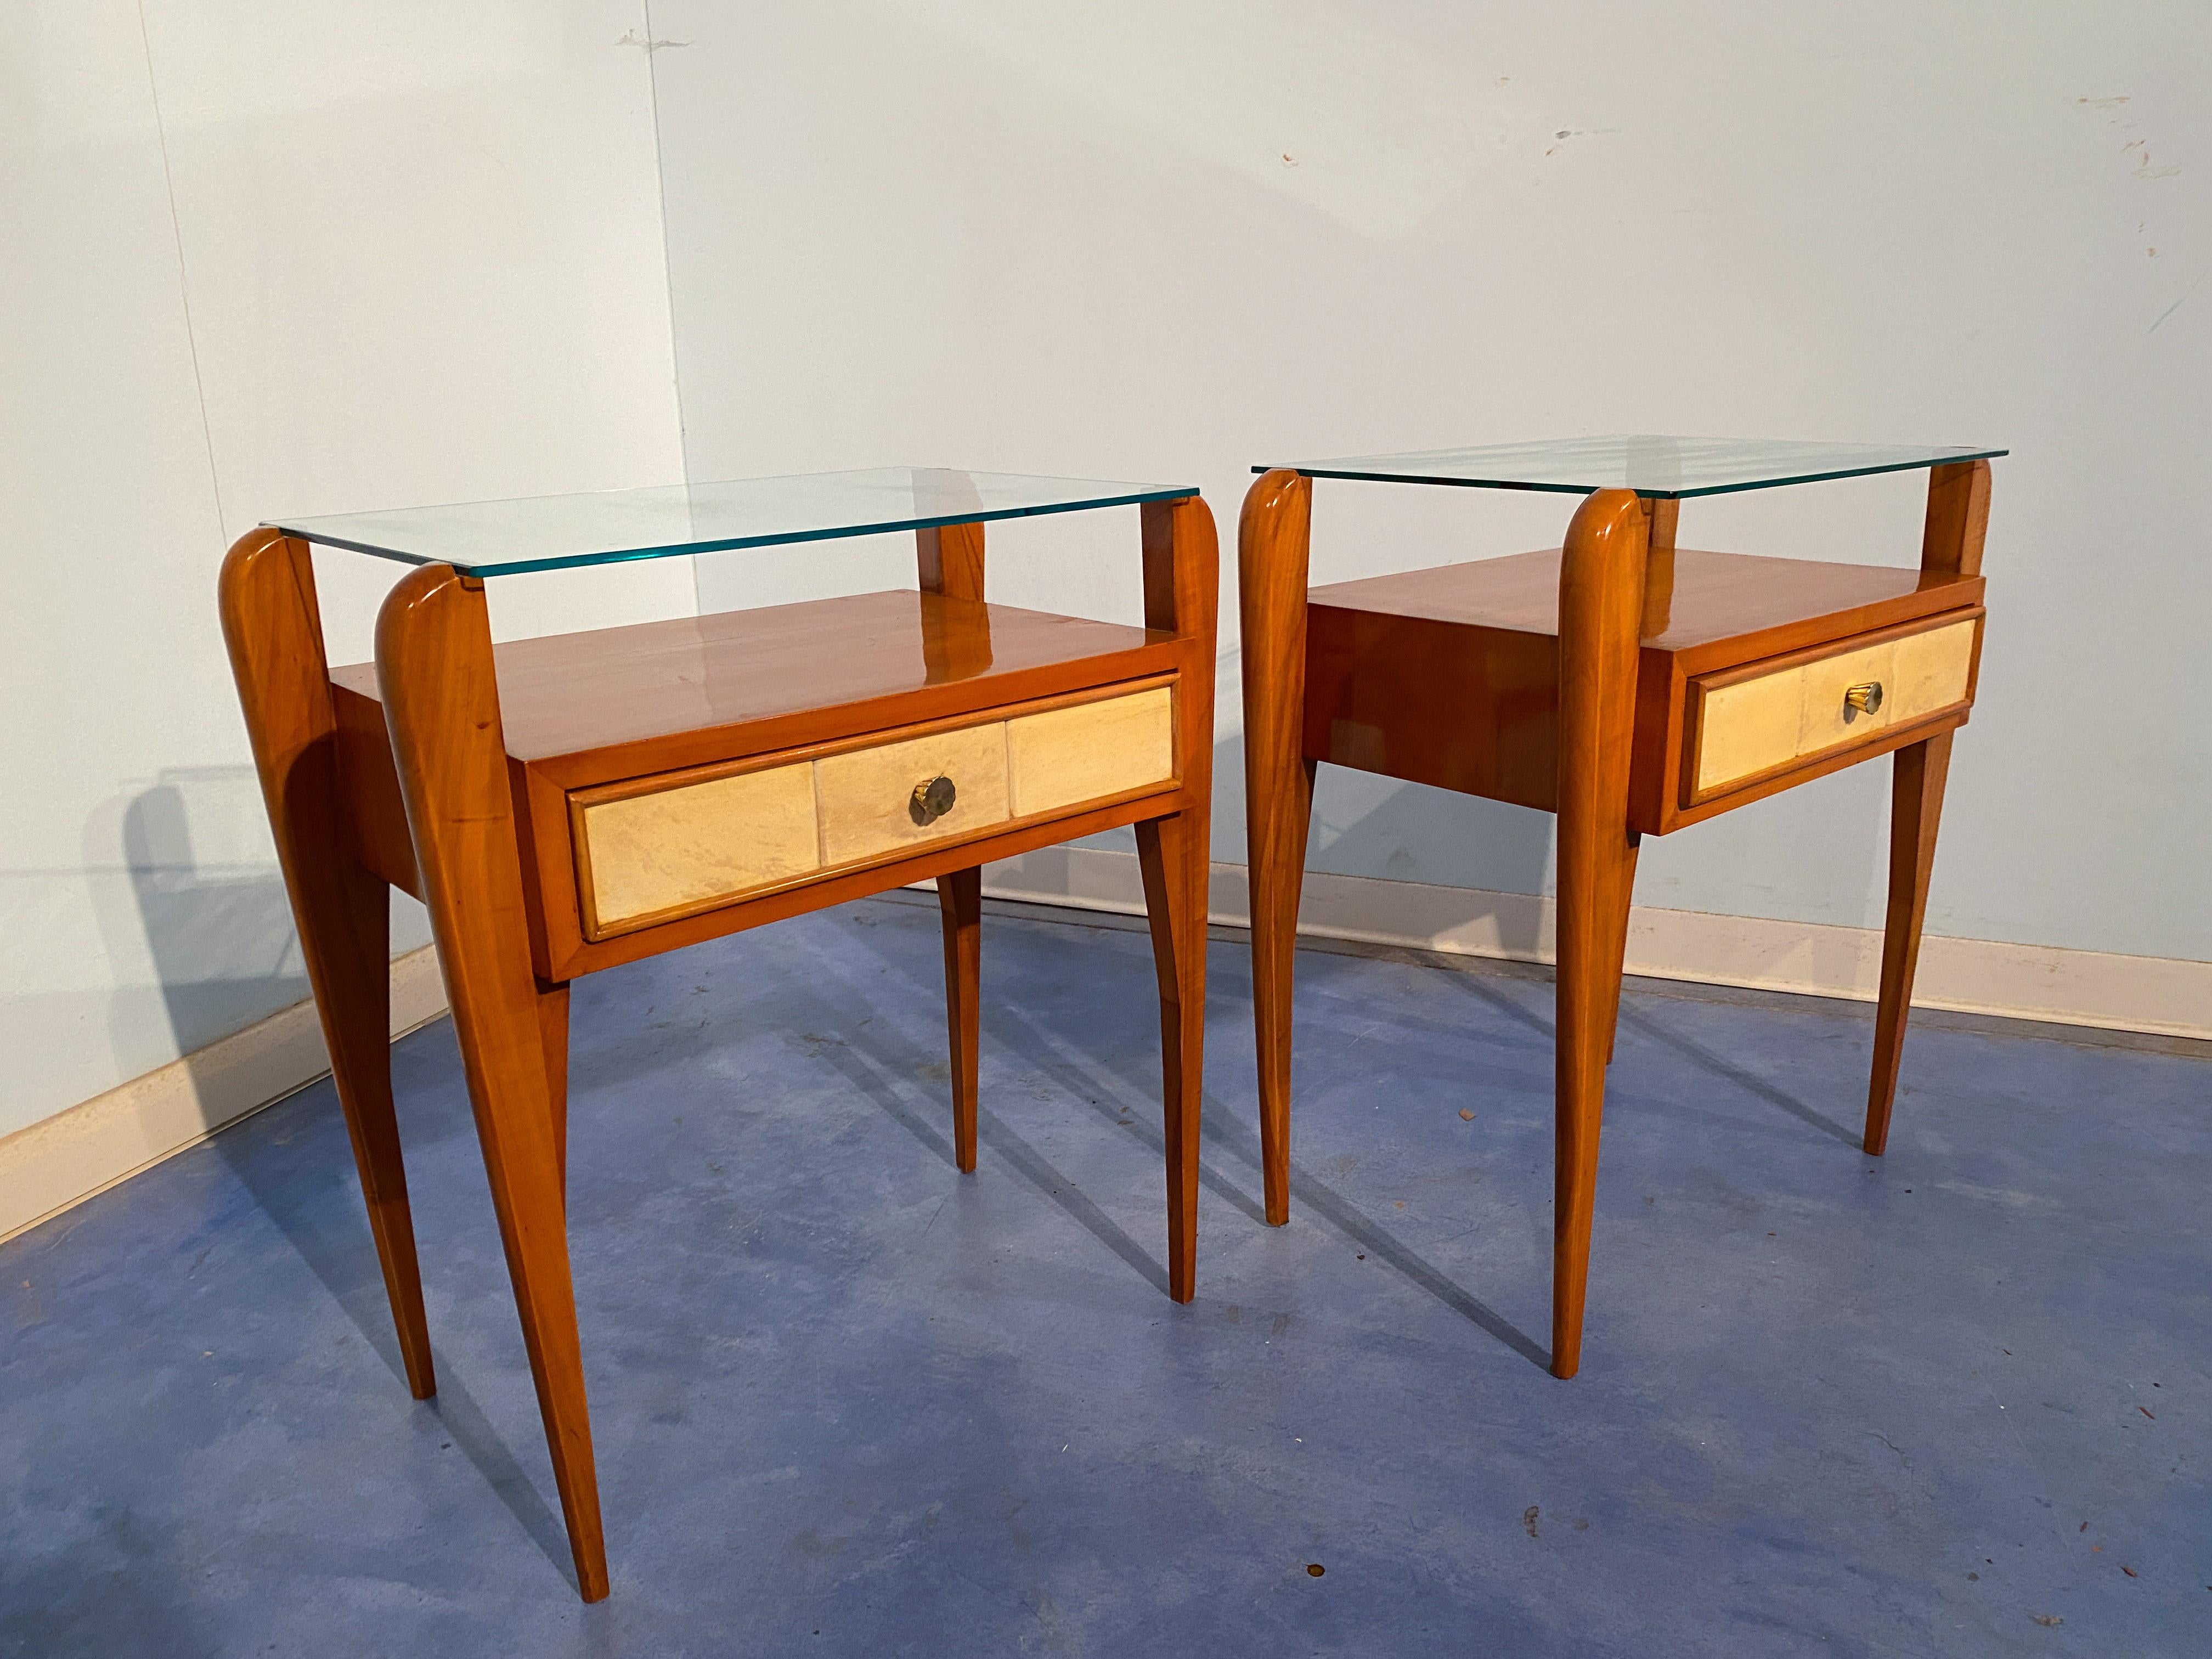 Italian Mid-Century Parchment Bedside or Nightstands by Osvaldo Borsani, 1950 For Sale 9